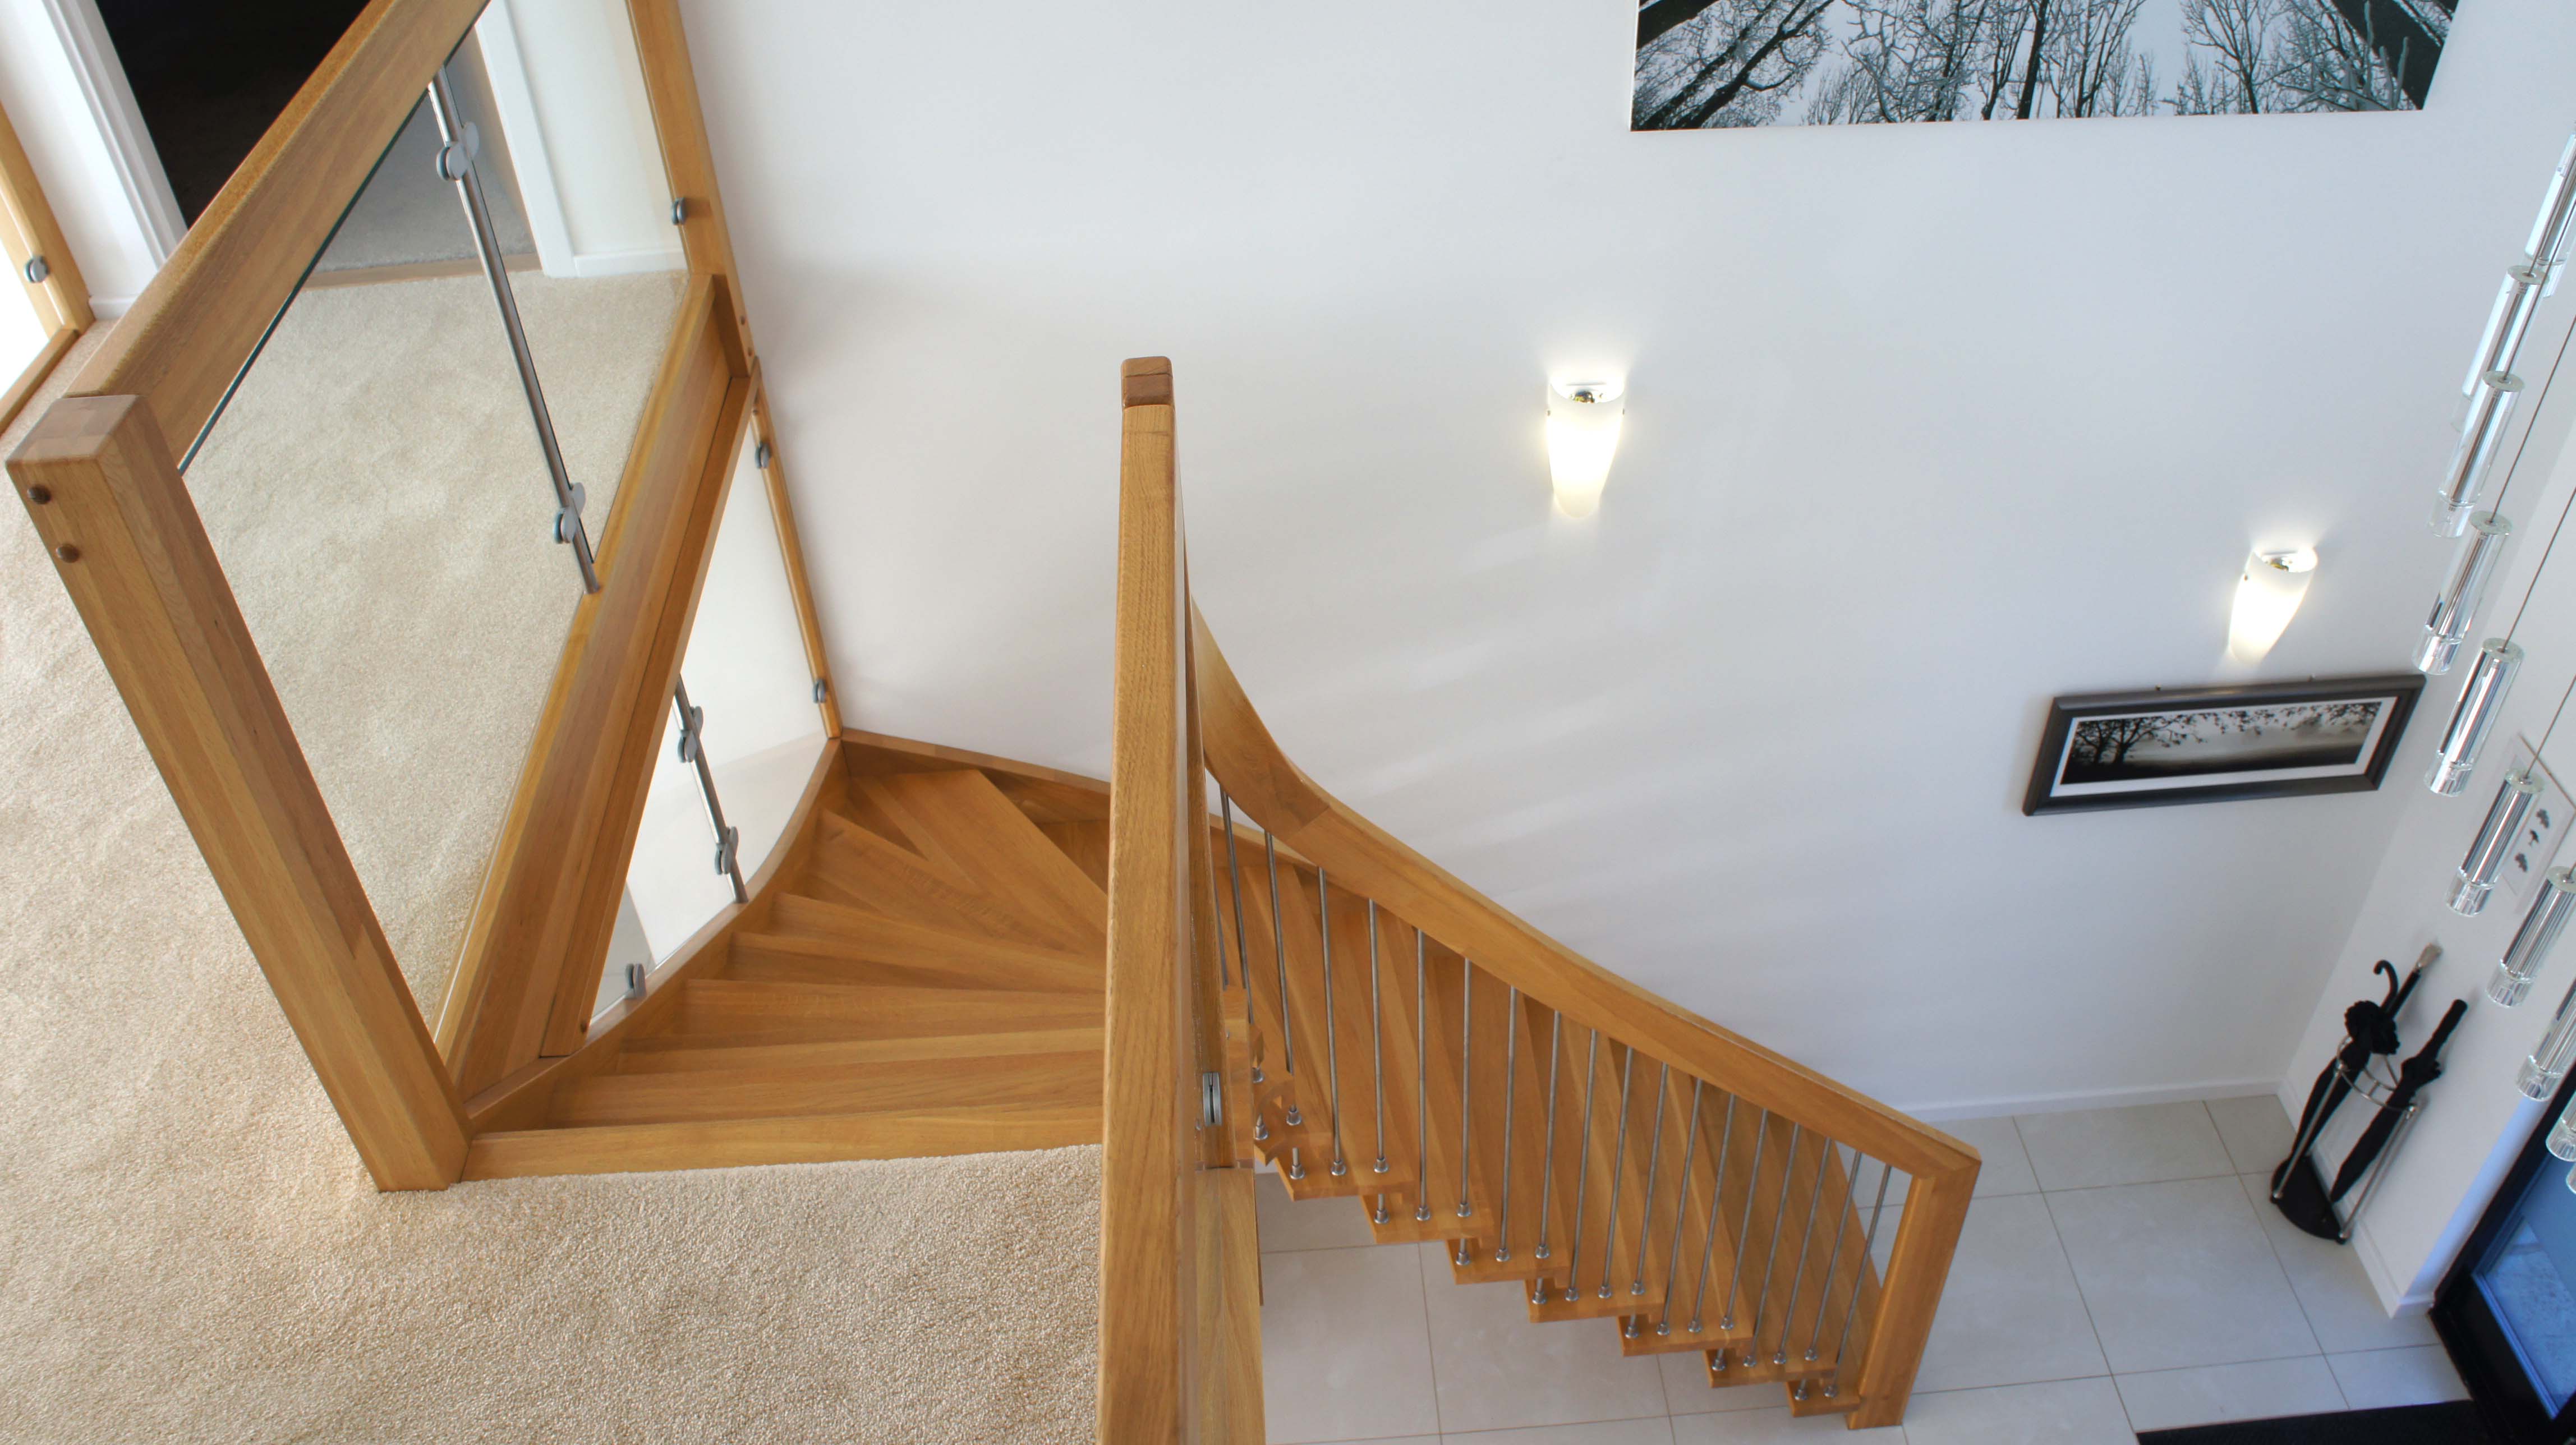 A top down view of a WF floating timber staircase in the New Forest